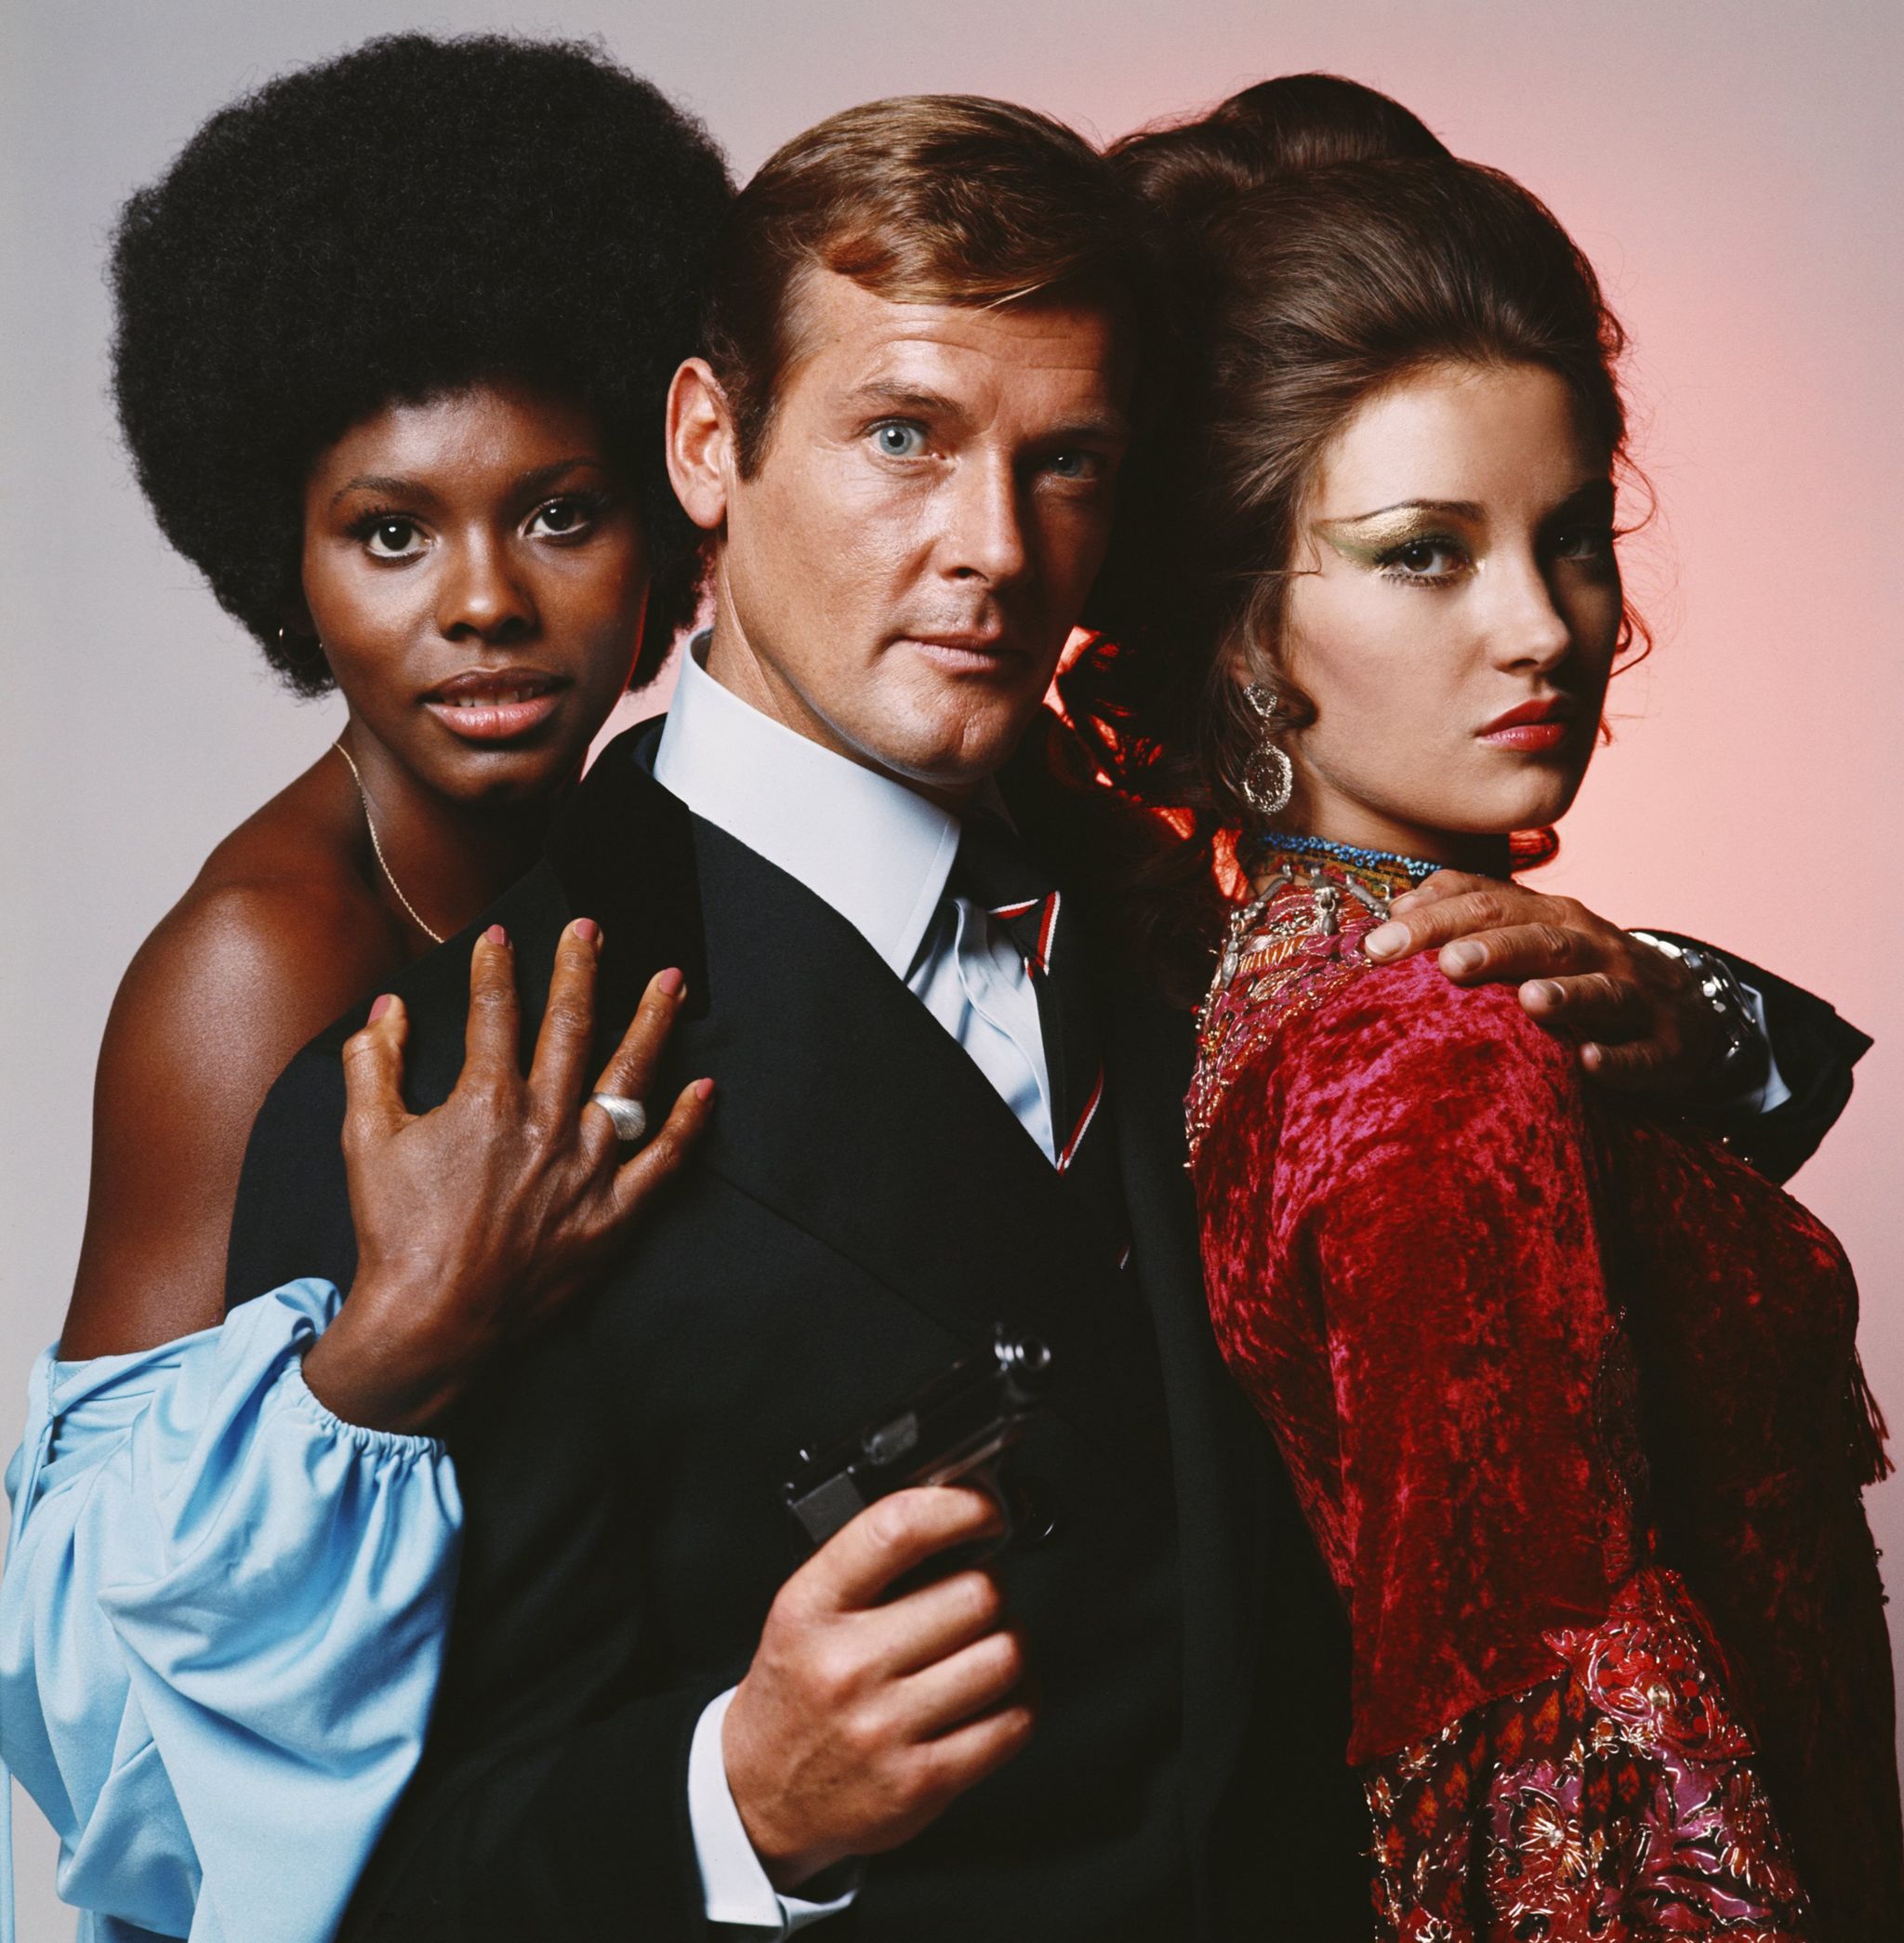 Actor Roger Moore as James Bond with Live and Let Die co-stars Gloria Hendry (left) and Jane Seymour in 1973